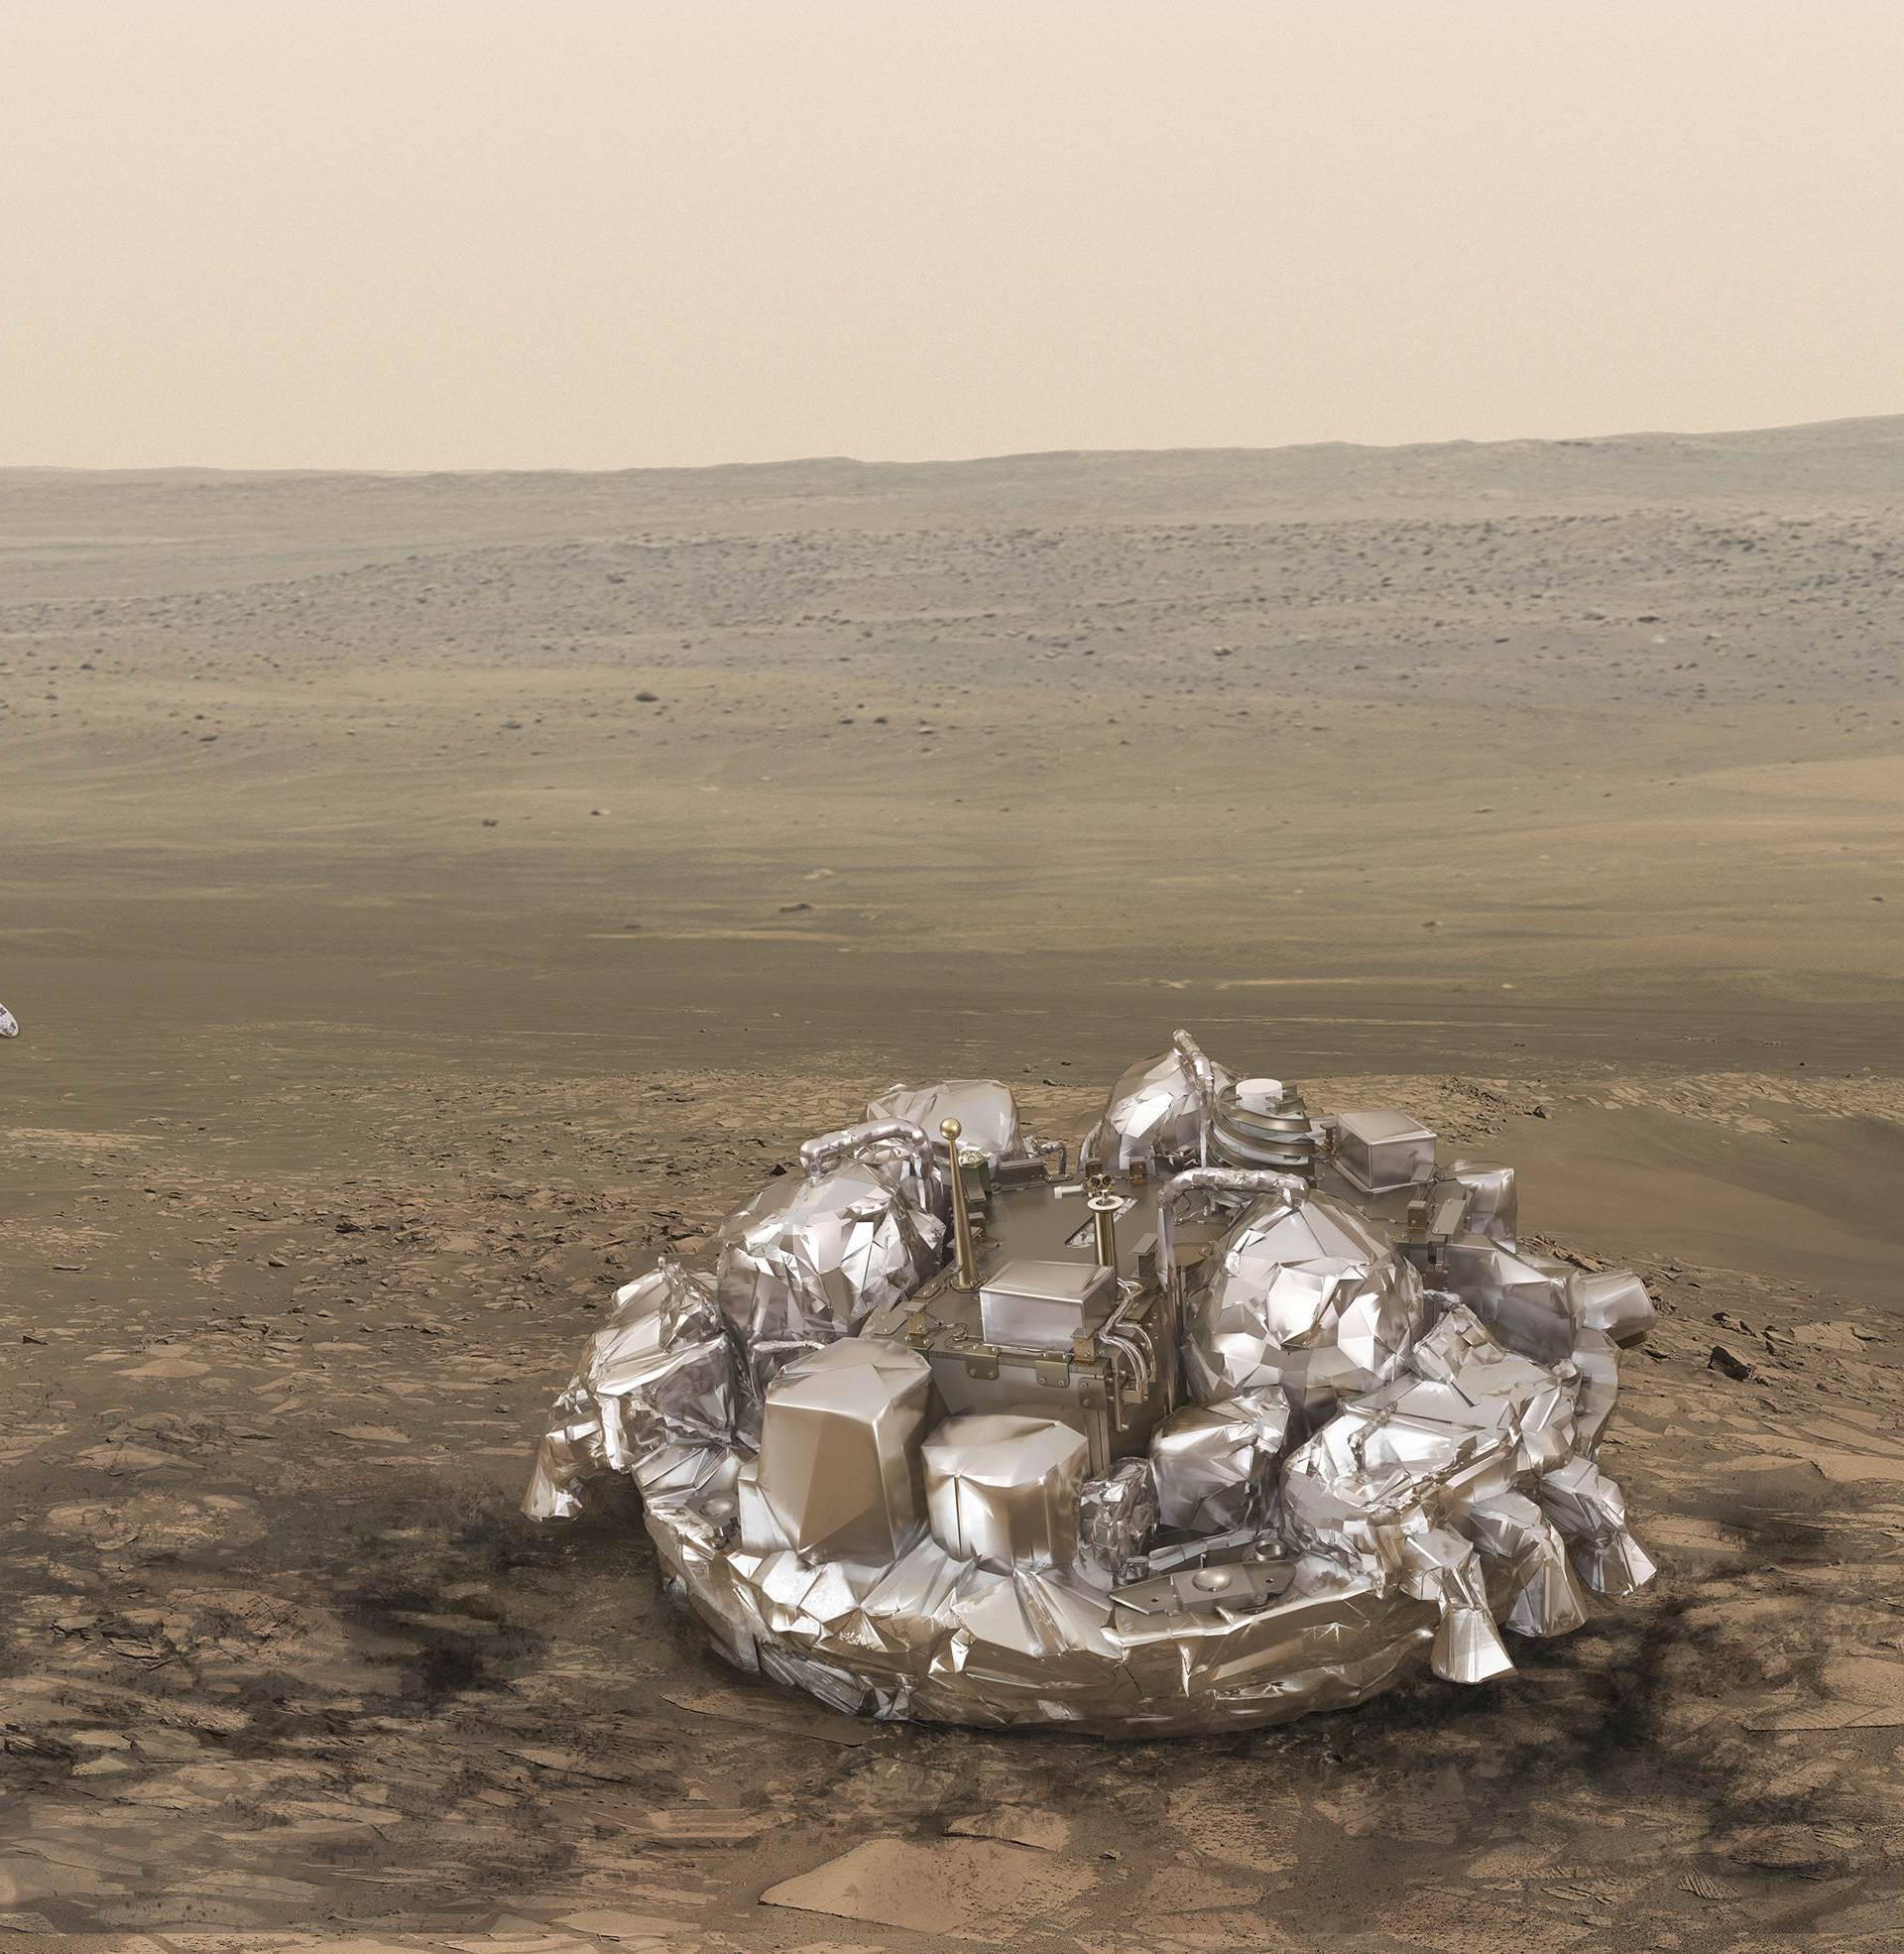 An illustration released by the European Space Agency (ESA) shows the Schiaparelli EDM lander